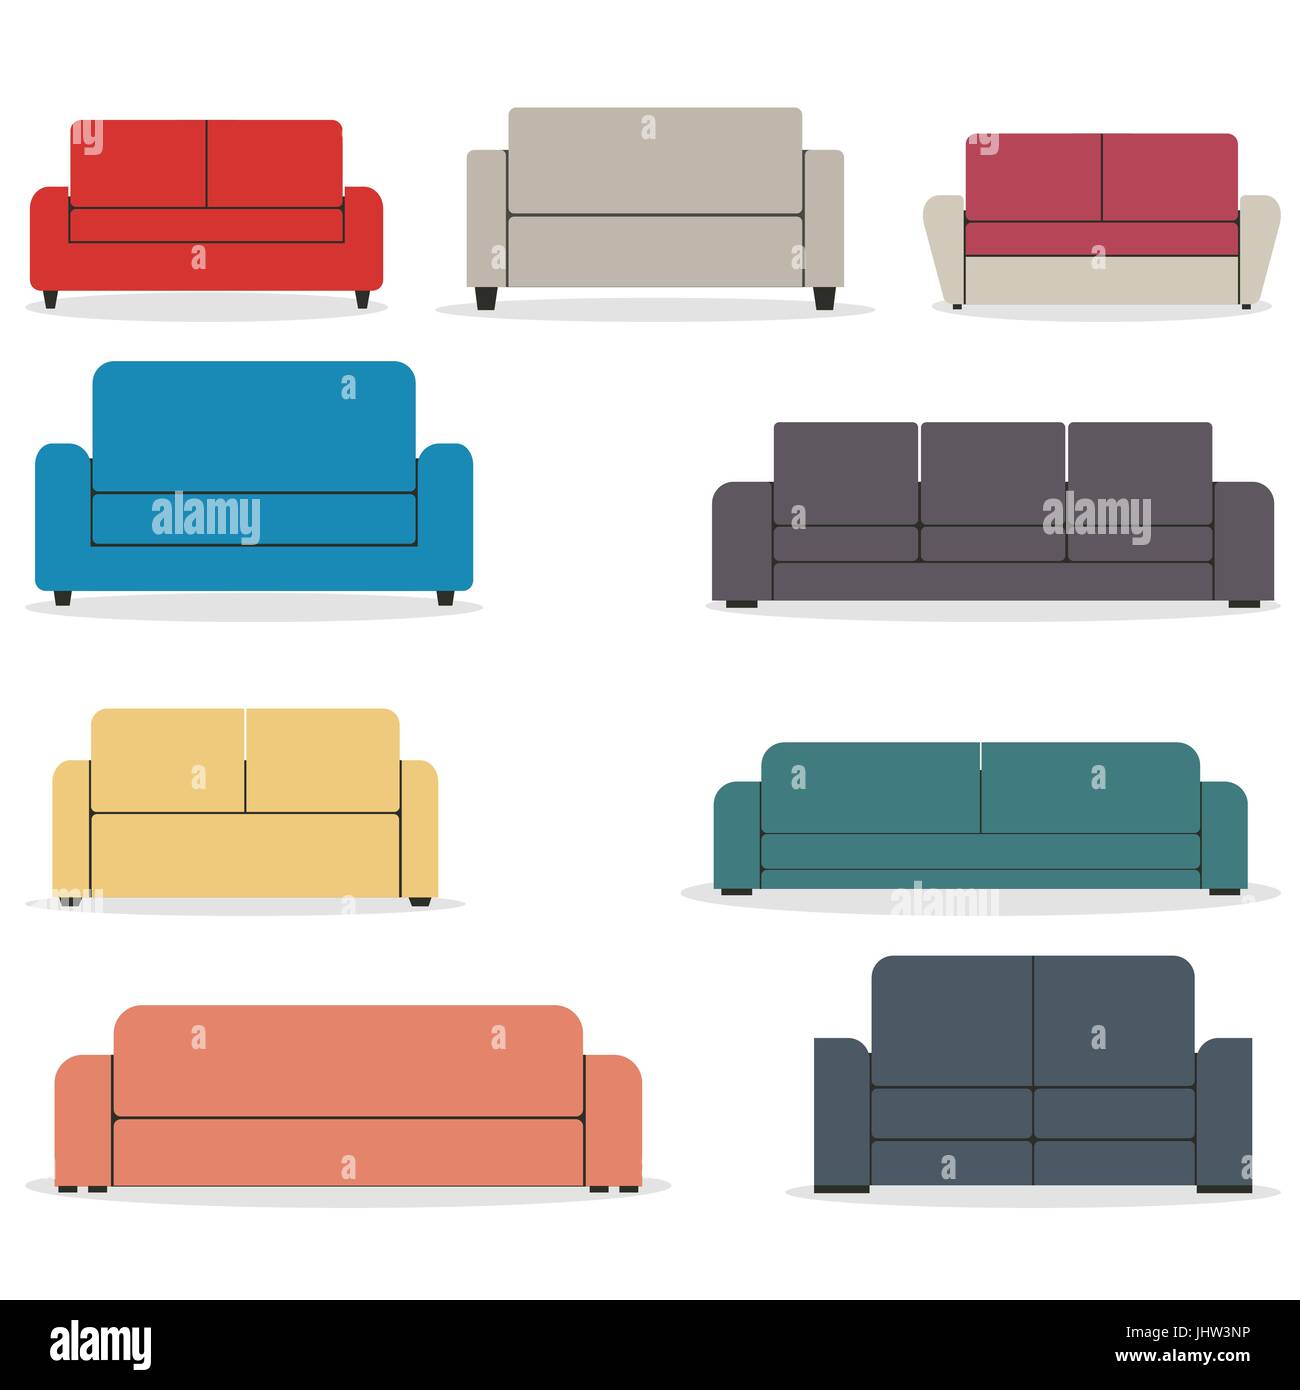 Set of pieces of furniture, sofas of various shapes isolated on white background. Elements of interior design in a flat style, vector illustrations. Stock Vector